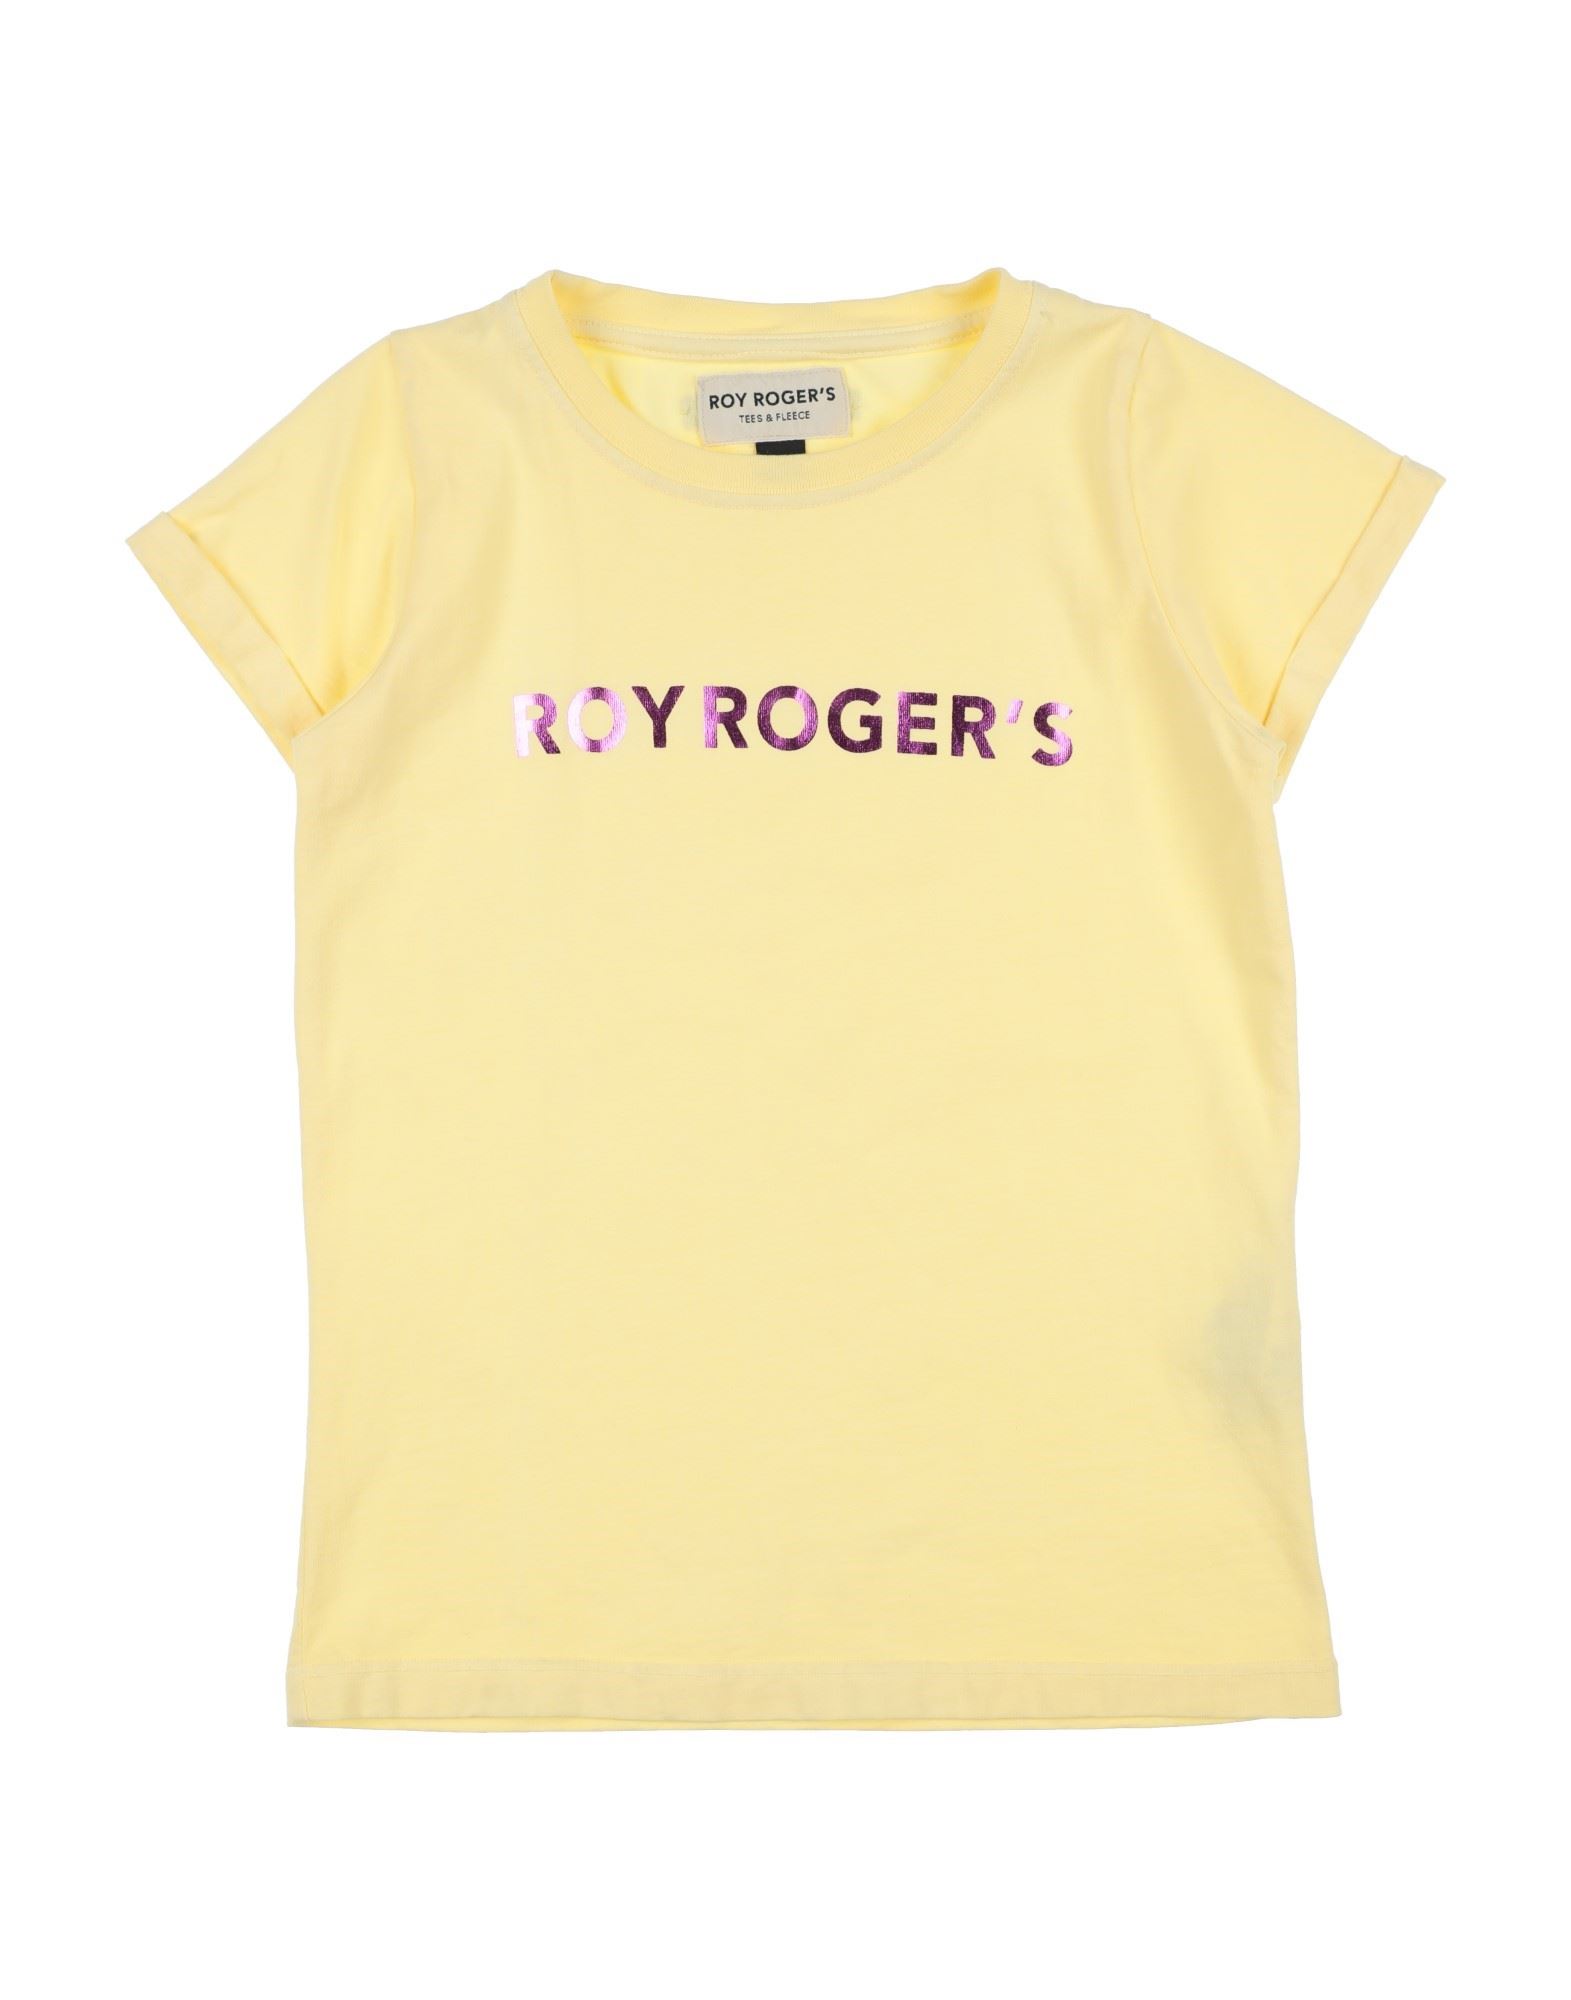 Roy Rogers Kids' Roÿ Roger's Toddler Girl T-shirt Light Yellow Size 6 Cotton